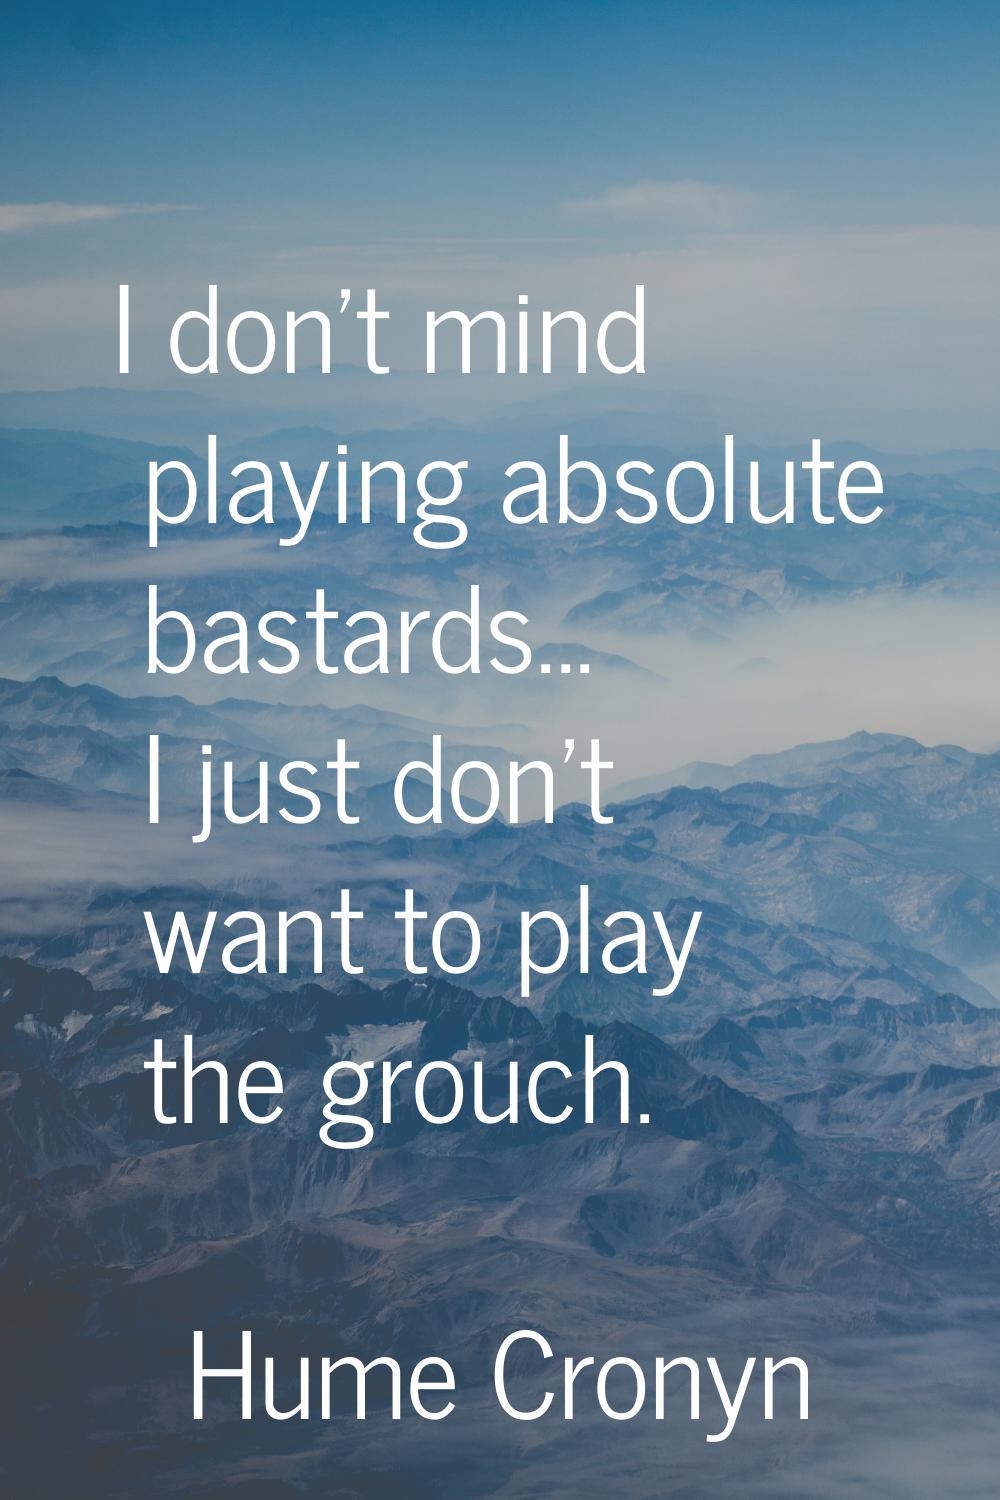 I don't mind playing absolute bastards... I just don't want to play the grouch.